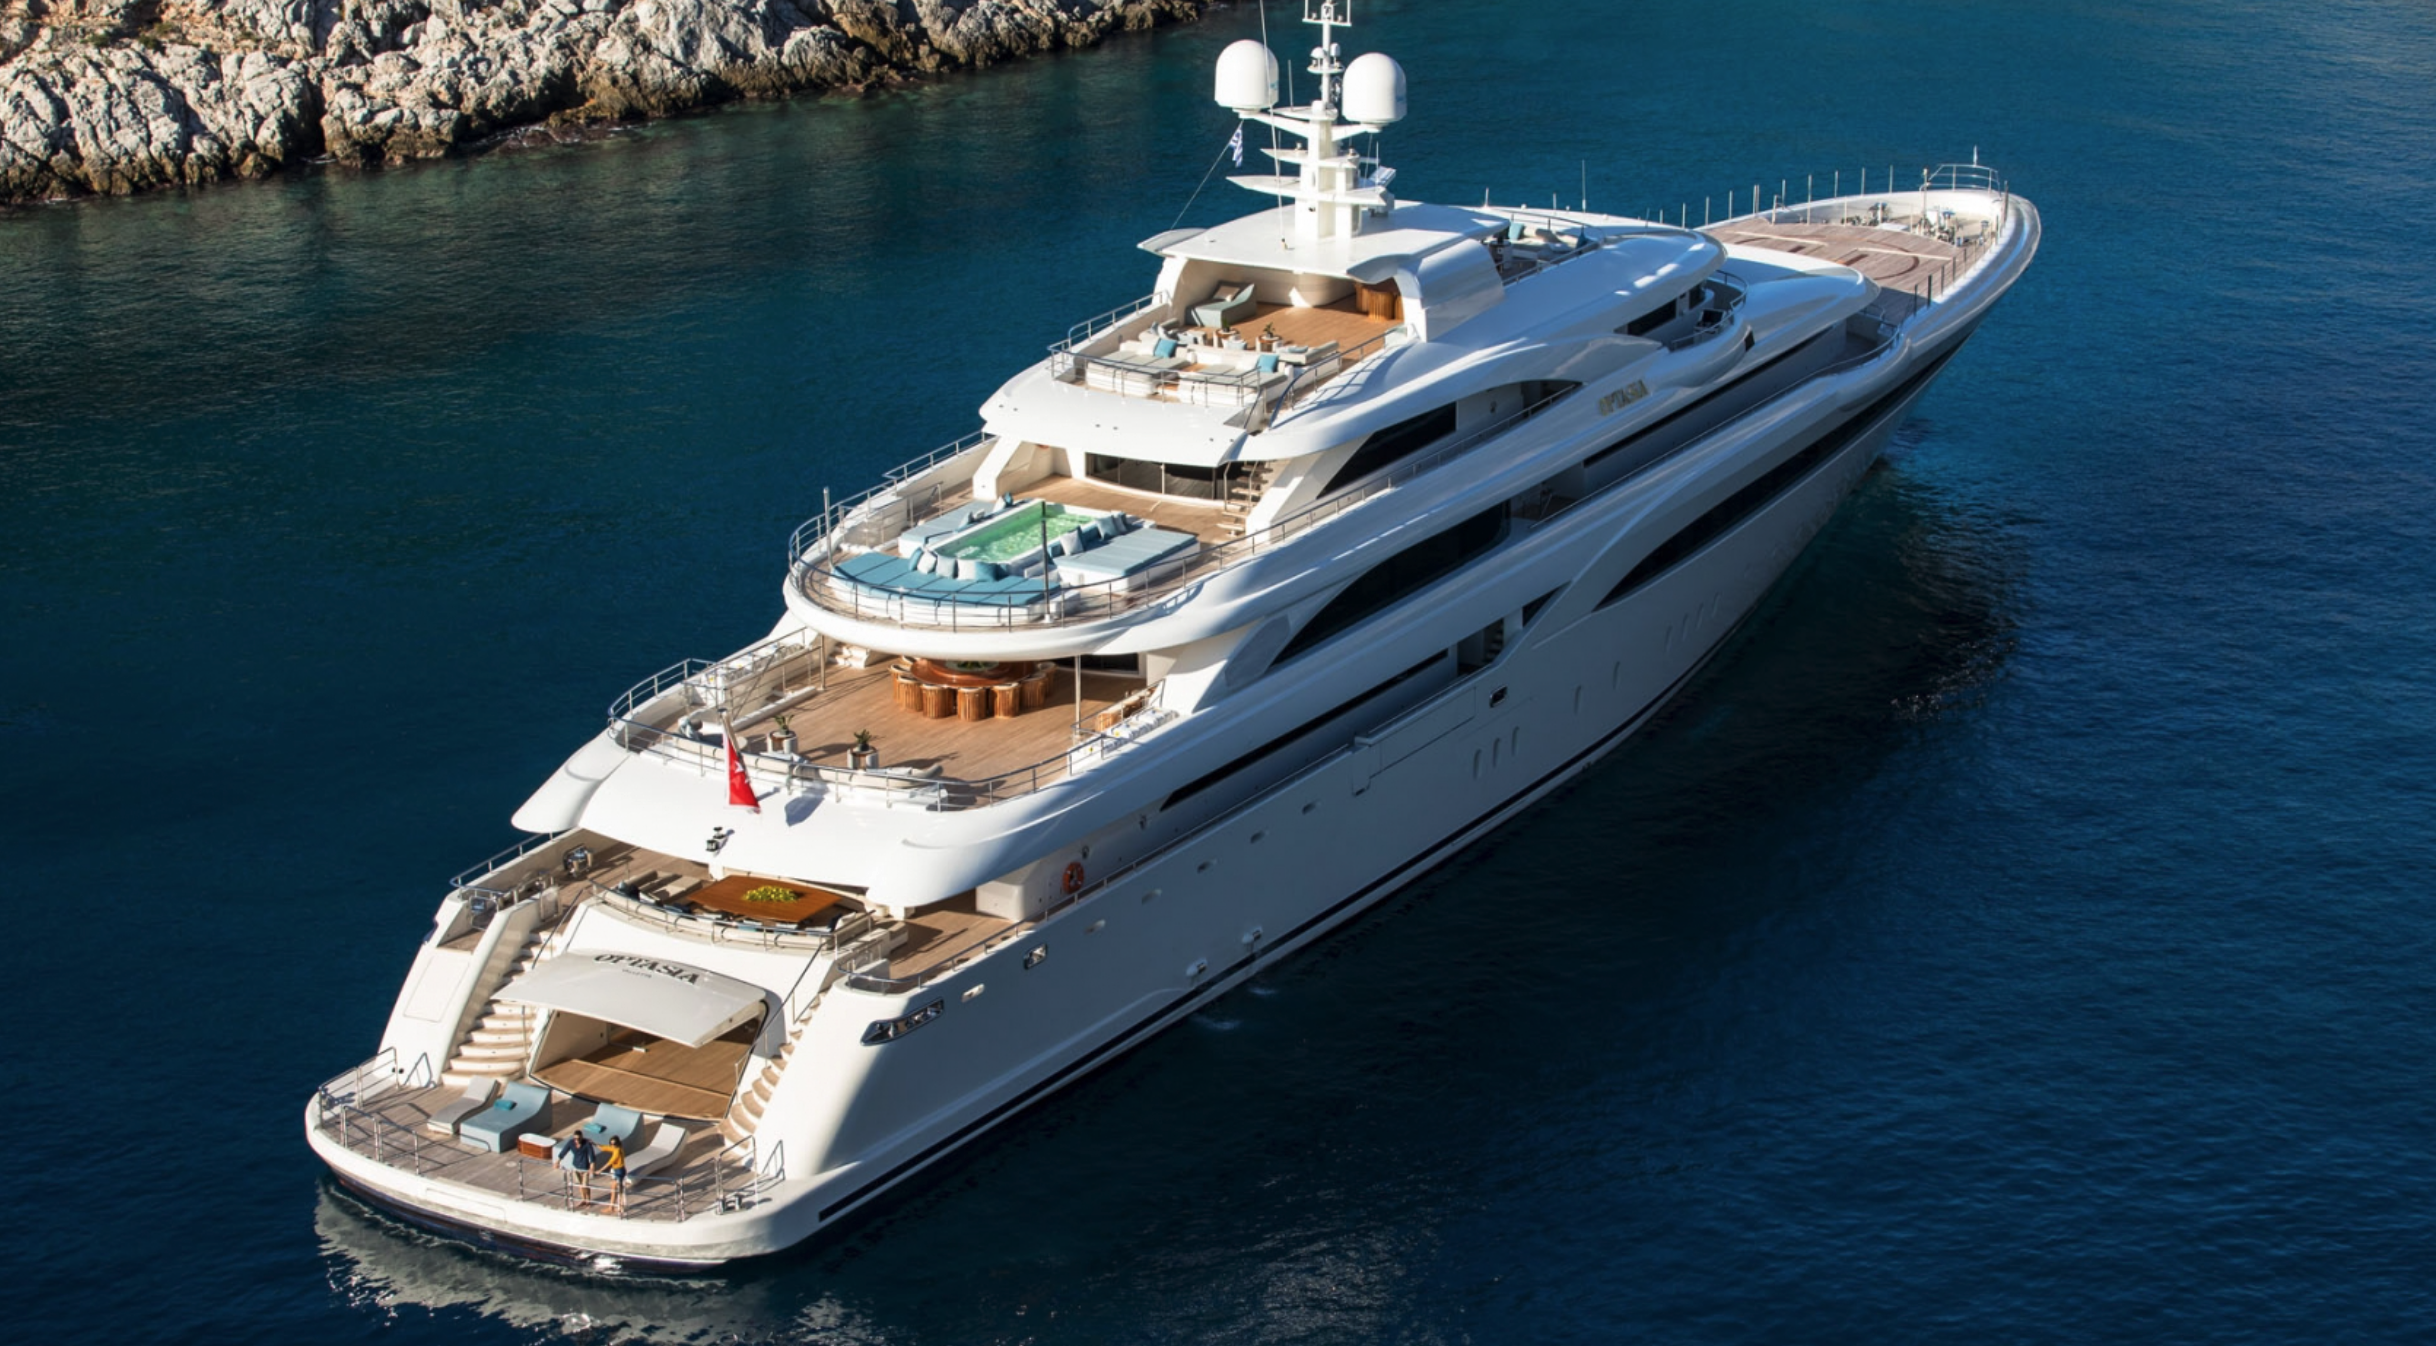 O’Ptasia - Superyacht charter worldwide & Boat hire in East Mediterranean 2